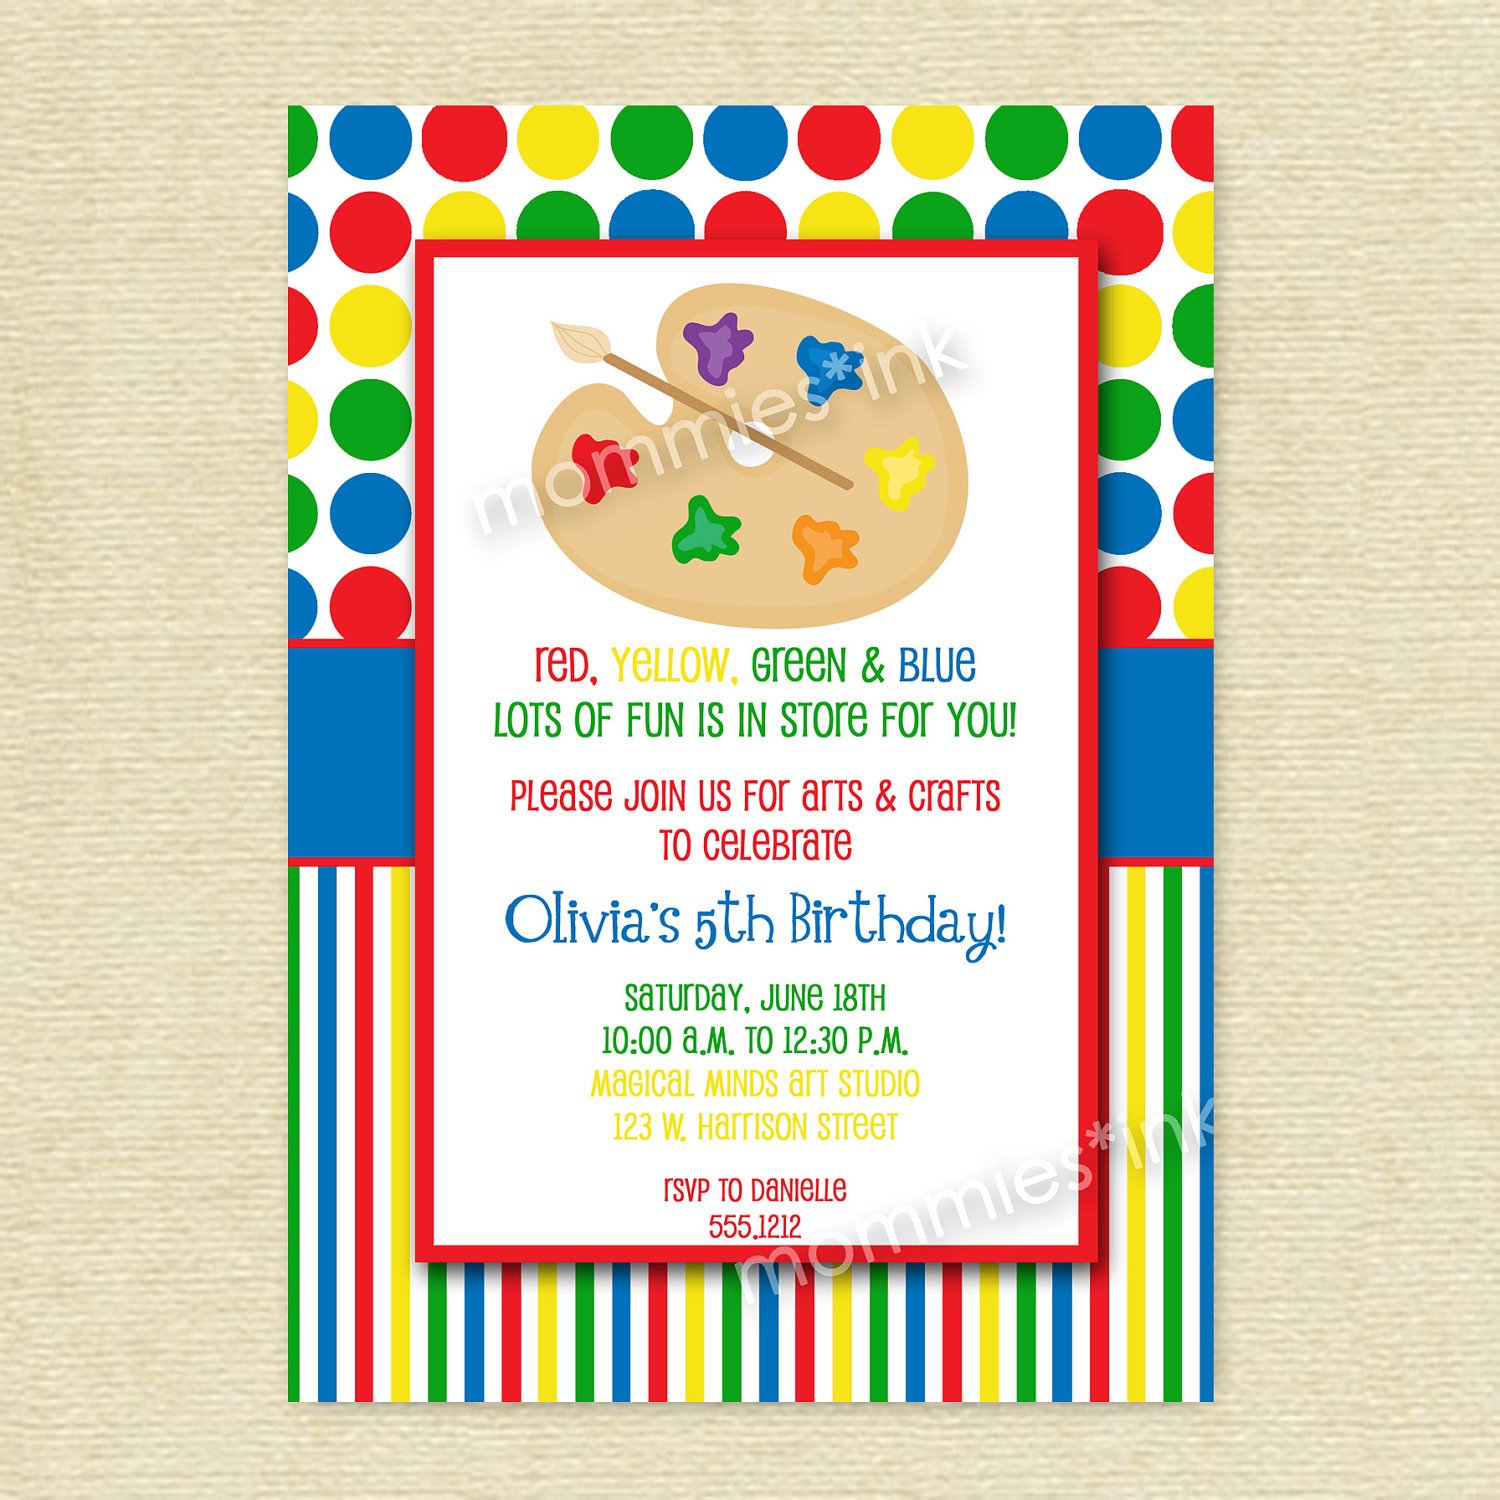 painting arts and crafts birthday party invitations